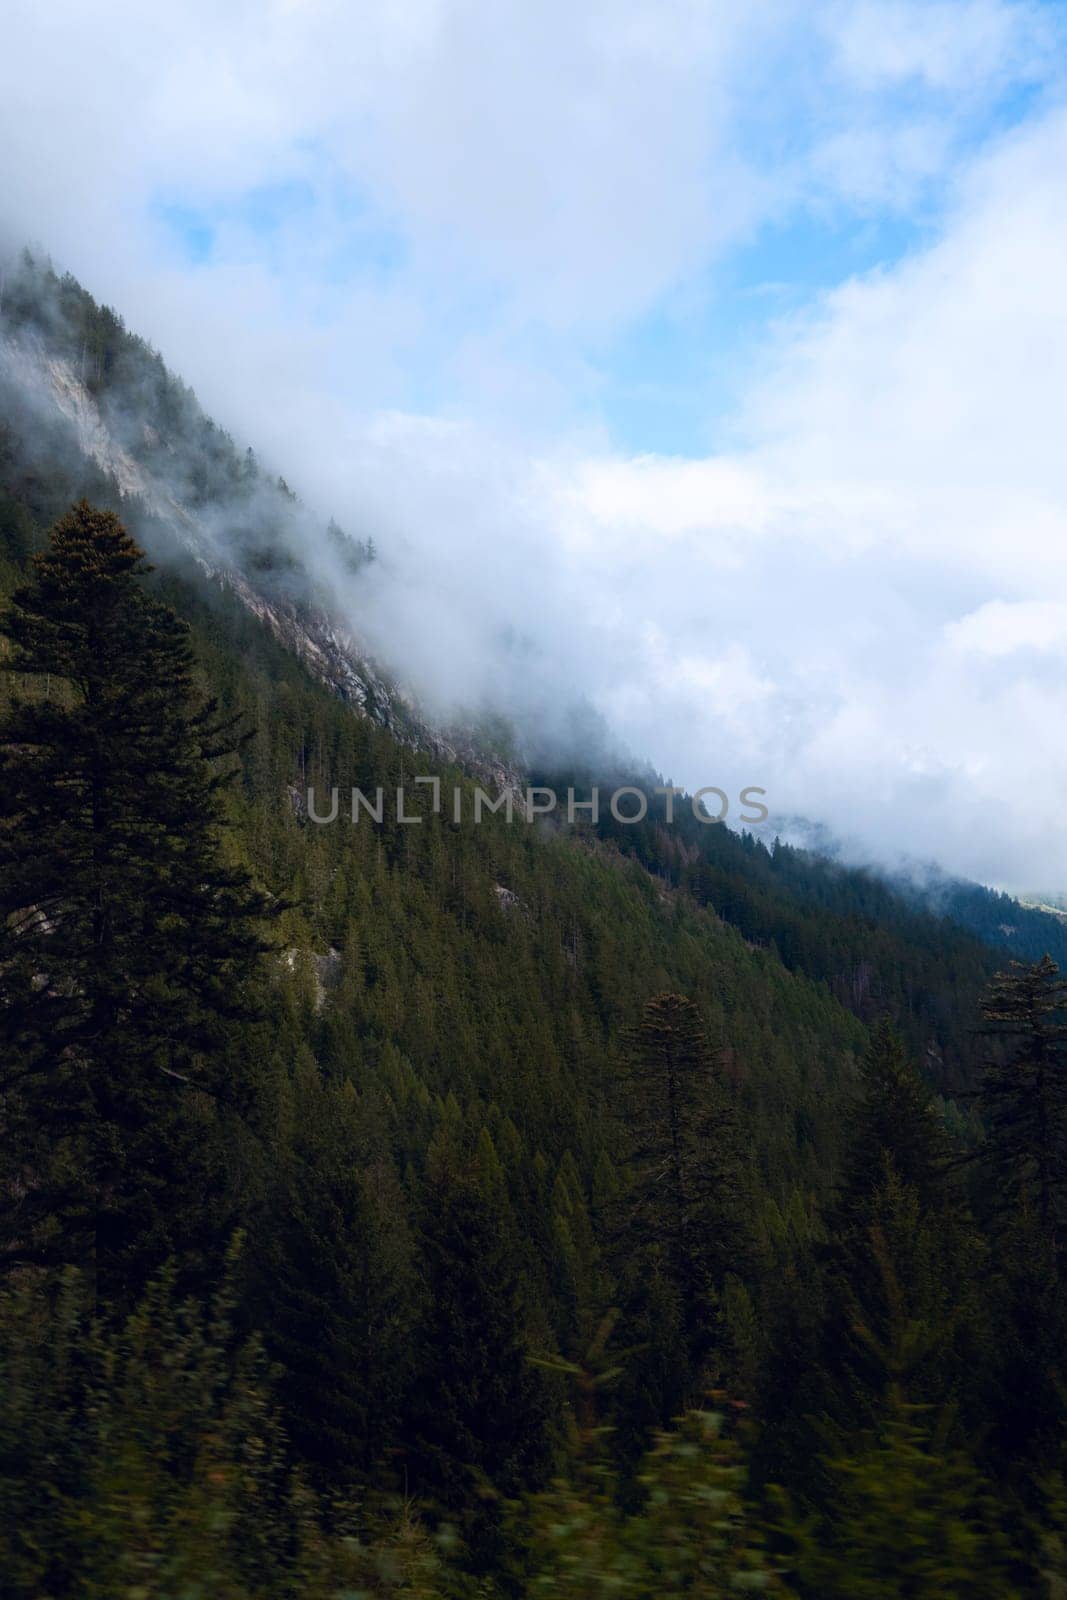 Ascending Tranquility: Trees and Mountain Mist Paint a Serene Alpine Landscape. by NadyaBeson